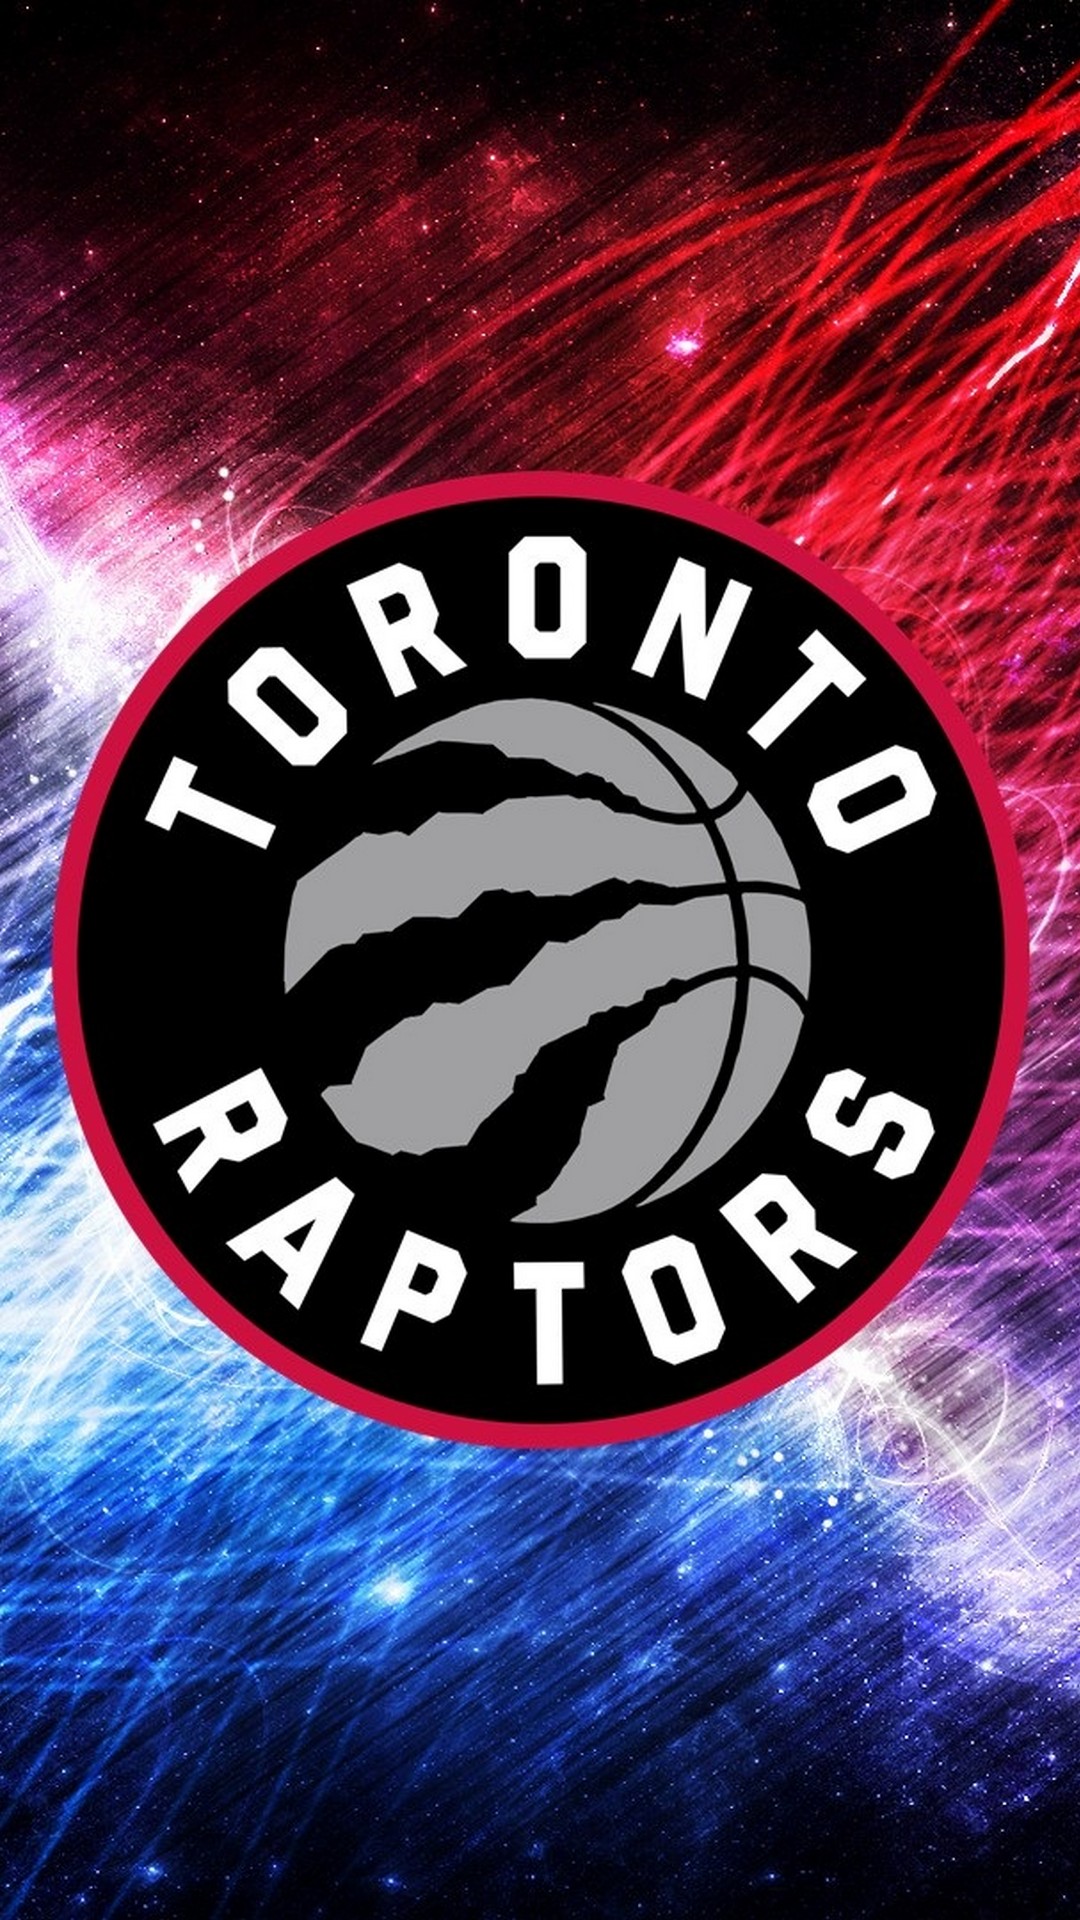 Toronto Raptors iPhone Wallpaper with image resolution 1080x1920 pixel. You can make this wallpaper for your iPhone 5, 6, 7, 8, X backgrounds, Mobile Screensaver, or iPad Lock Screen